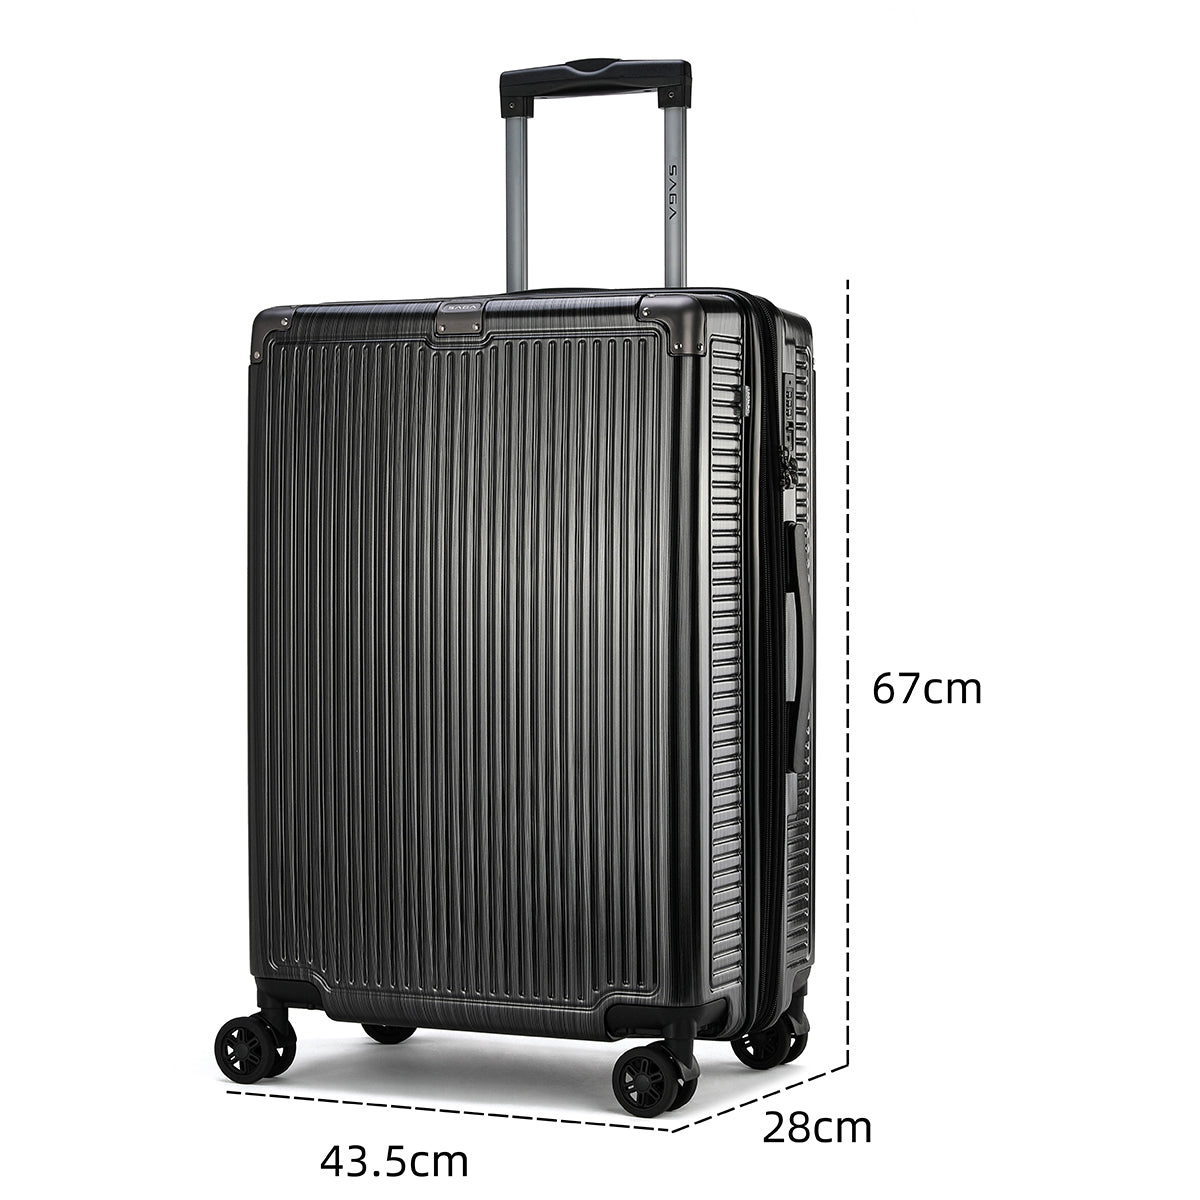 A set of 4 polycarbonate travel bags. Strong durability, dark gray bold design